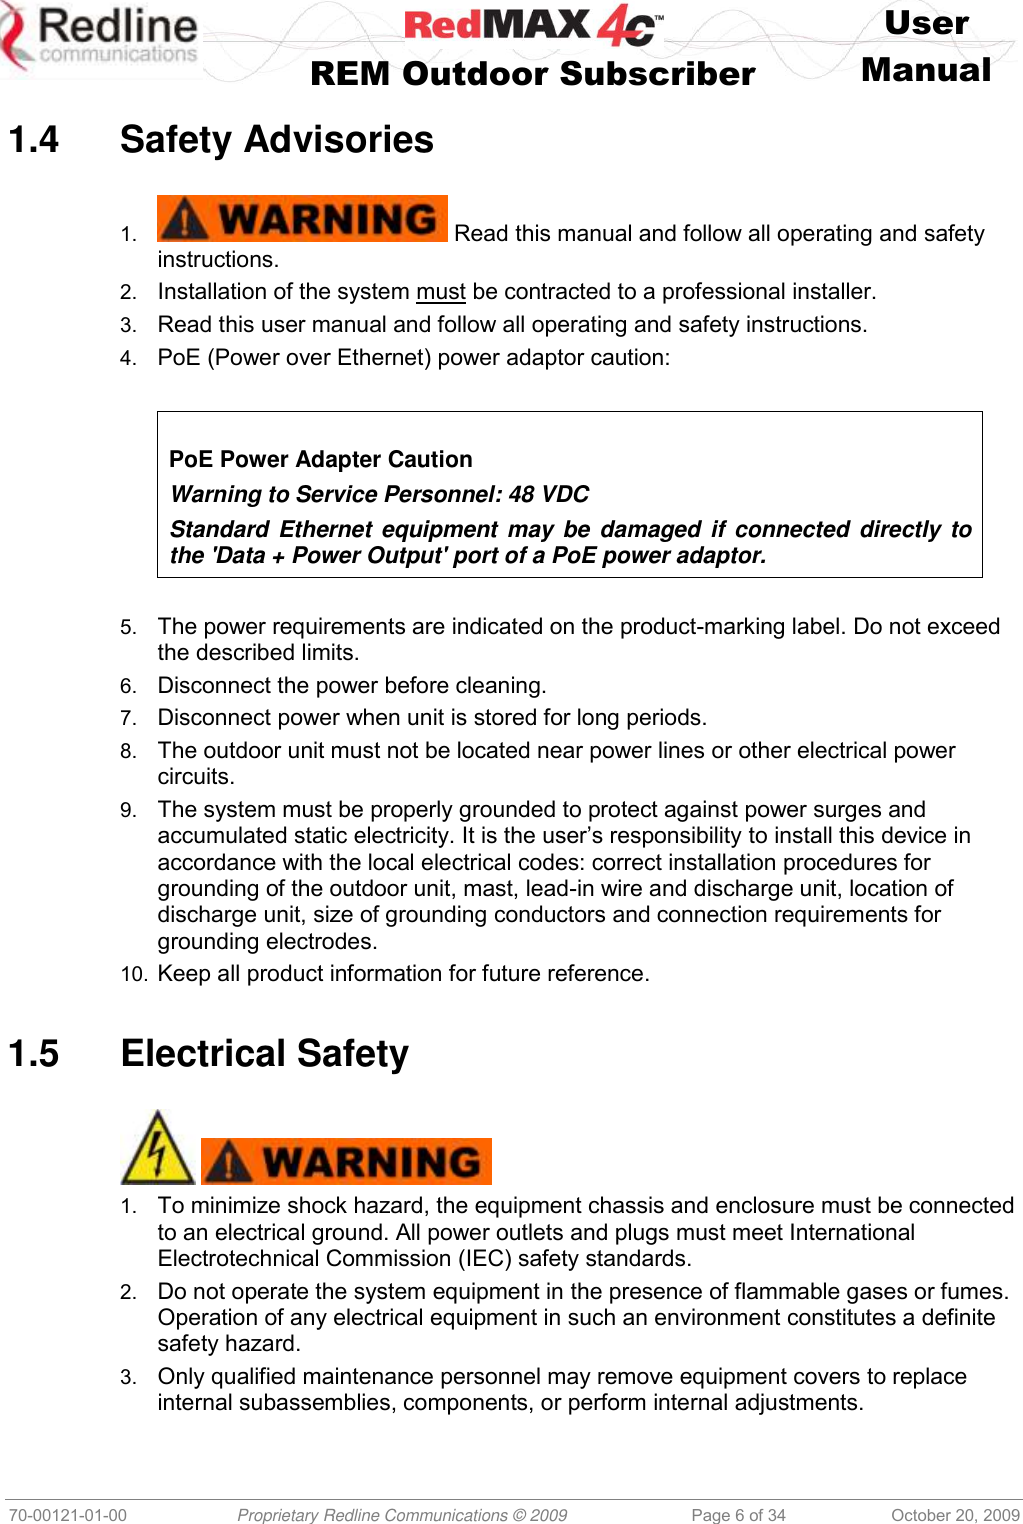    User   REM Outdoor Subscriber  Manual   70-00121-01-00 Proprietary Redline Communications © 2009 Page 6 of 34 October 20, 2009  1.4  Safety Advisories  1.  Read this manual and follow all operating and safety instructions. 2. Installation of the system must be contracted to a professional installer. 3. Read this user manual and follow all operating and safety instructions. 4. PoE (Power over Ethernet) power adaptor caution:    PoE Power Adapter Caution Warning to Service Personnel: 48 VDC Standard Ethernet equipment may  be damaged  if connected directly to the &apos;Data + Power Output&apos; port of a PoE power adaptor.   5. The power requirements are indicated on the product-marking label. Do not exceed the described limits. 6. Disconnect the power before cleaning. 7. Disconnect power when unit is stored for long periods. 8. The outdoor unit must not be located near power lines or other electrical power circuits. 9. The system must be properly grounded to protect against power surges and accumulated static electricity. It is the user’s responsibility to install this device in accordance with the local electrical codes: correct installation procedures for grounding of the outdoor unit, mast, lead-in wire and discharge unit, location of discharge unit, size of grounding conductors and connection requirements for grounding electrodes. 10. Keep all product information for future reference.  1.5  Electrical Safety     1. To minimize shock hazard, the equipment chassis and enclosure must be connected to an electrical ground. All power outlets and plugs must meet International Electrotechnical Commission (IEC) safety standards. 2. Do not operate the system equipment in the presence of flammable gases or fumes. Operation of any electrical equipment in such an environment constitutes a definite safety hazard. 3. Only qualified maintenance personnel may remove equipment covers to replace internal subassemblies, components, or perform internal adjustments. 